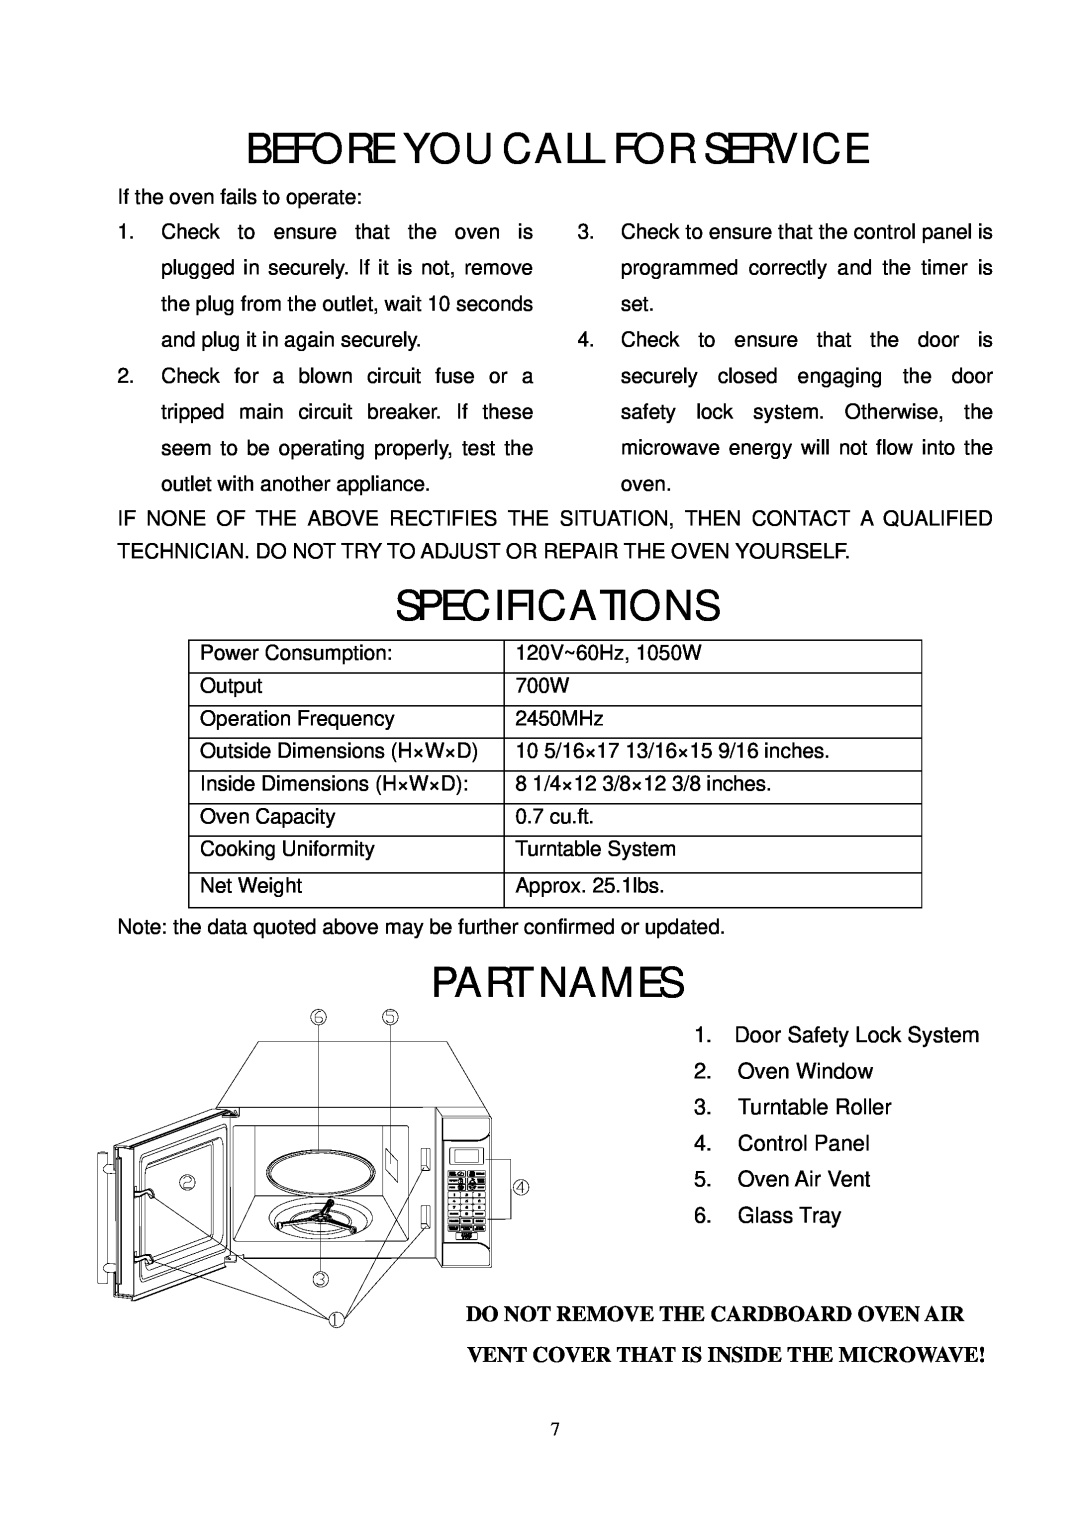 RCA RMW768 owner manual Before You Call For Service, Specifications, Part Names, Do Not Remove The Cardboard Oven Air 